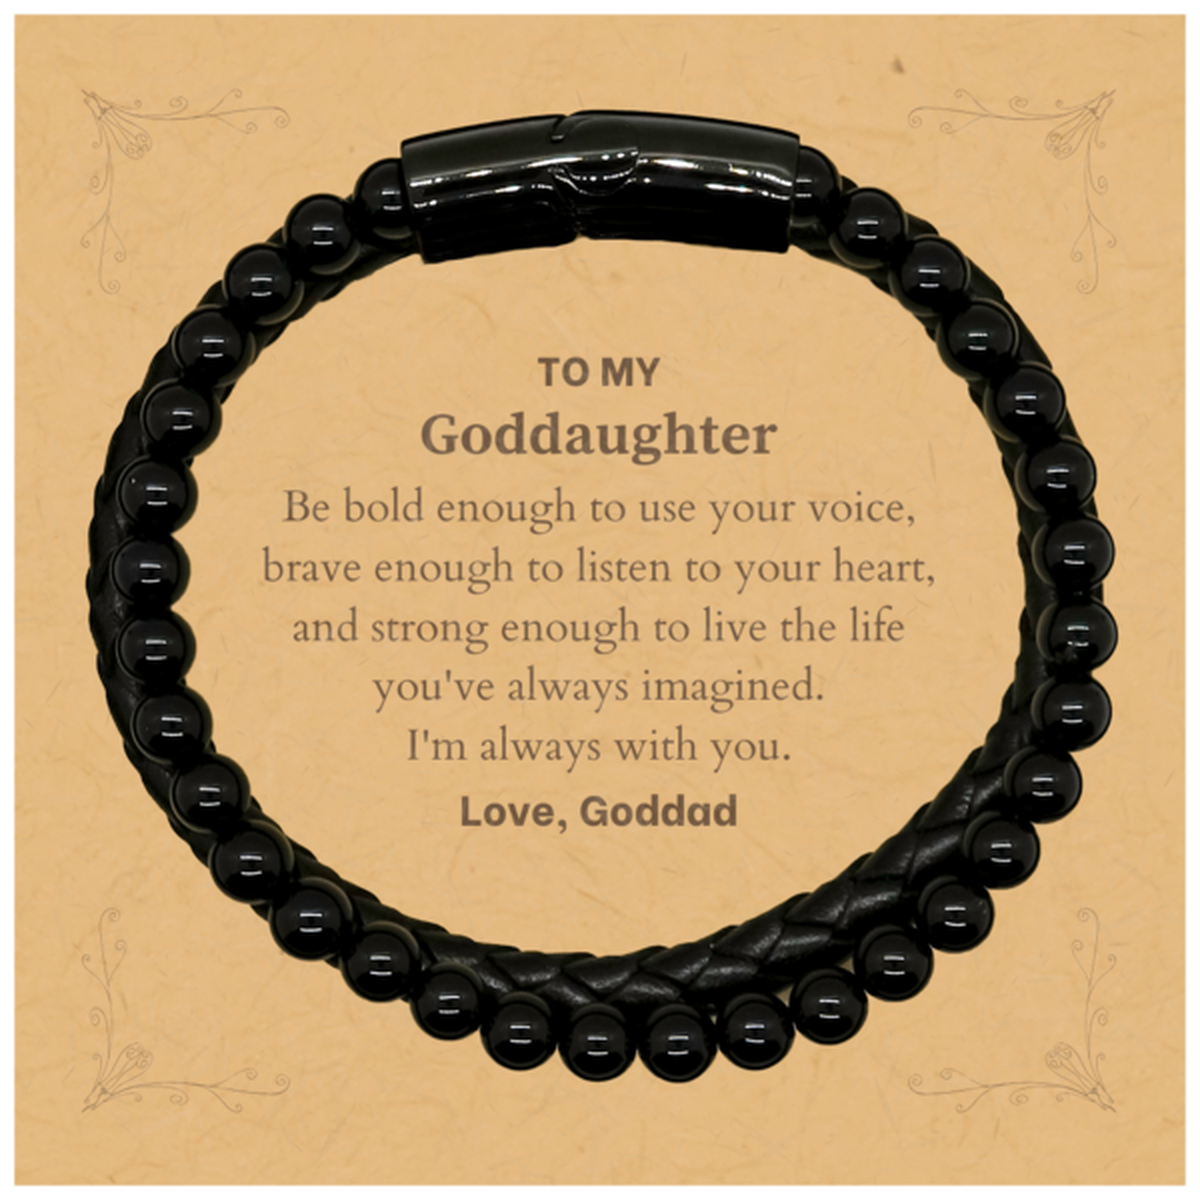 Keepsake Goddaughter Stone Leather Bracelets Gift Idea Graduation Christmas Birthday Goddaughter from Goddad, Goddaughter Be bold enough to use your voice, brave enough to listen to your heart. Love, Goddad